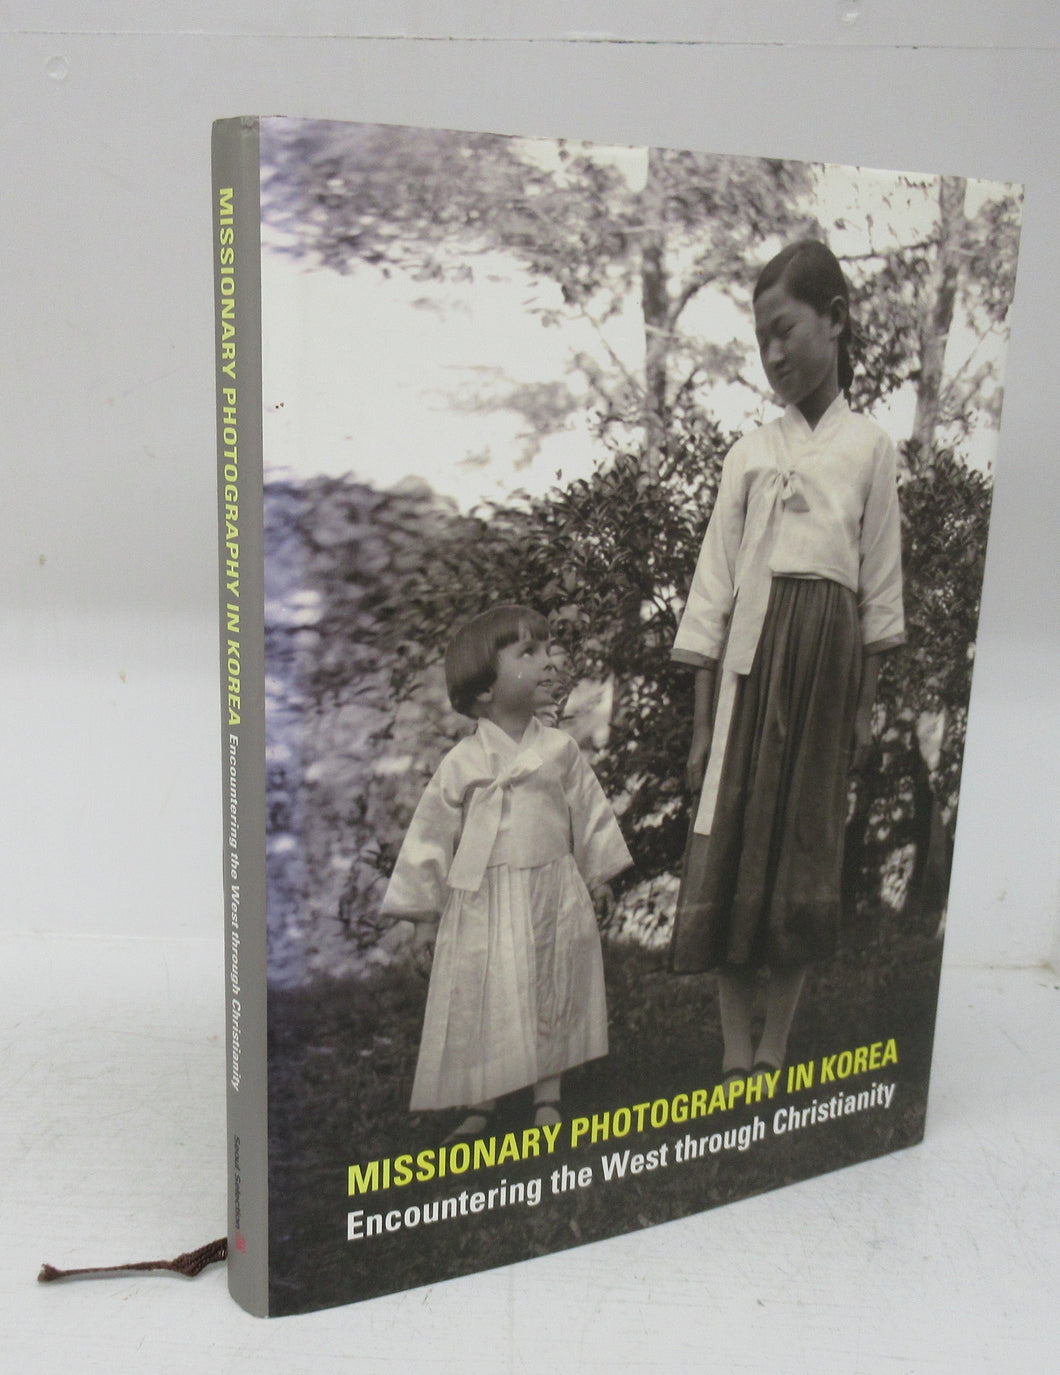 Missionary Photography in Korea: Encountering the West through Christianity